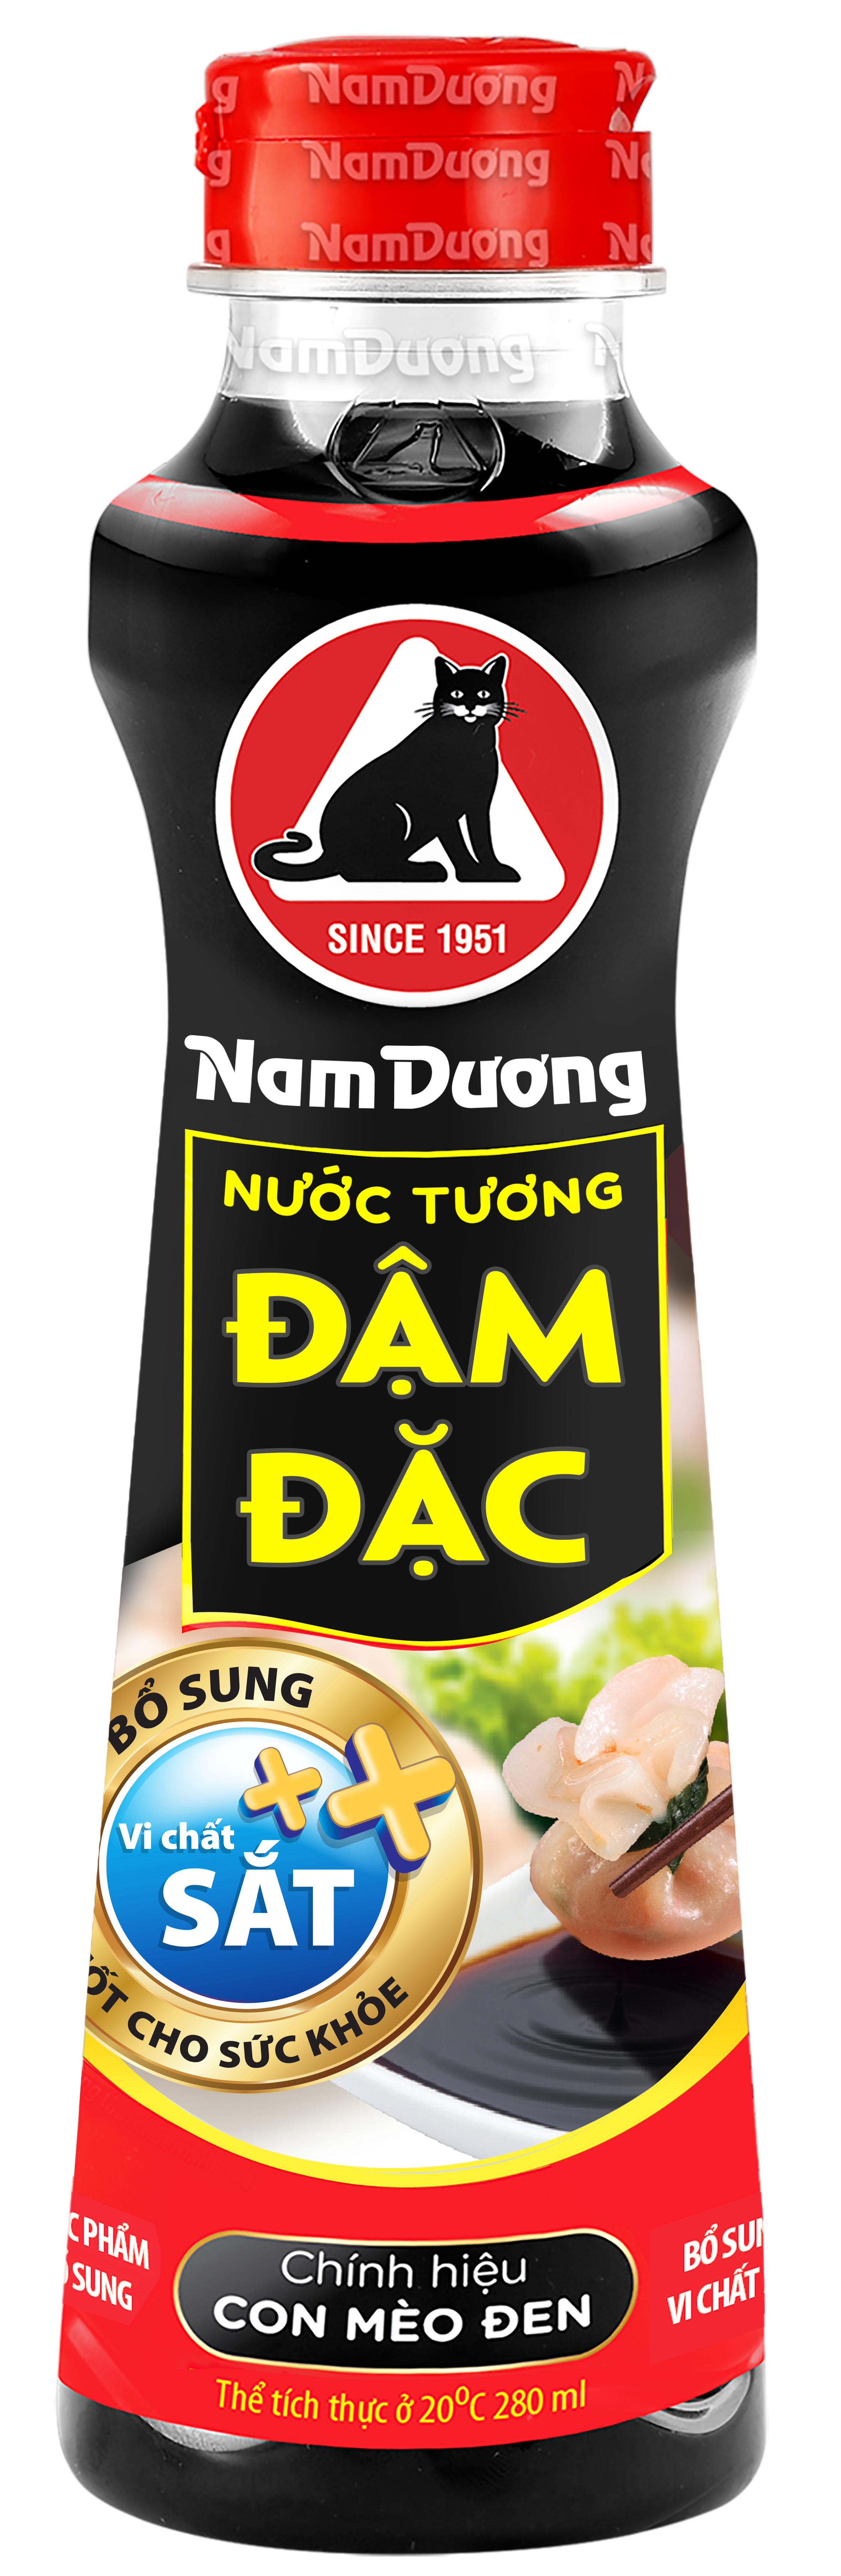 Nam Duong Condensed Soy Sauce